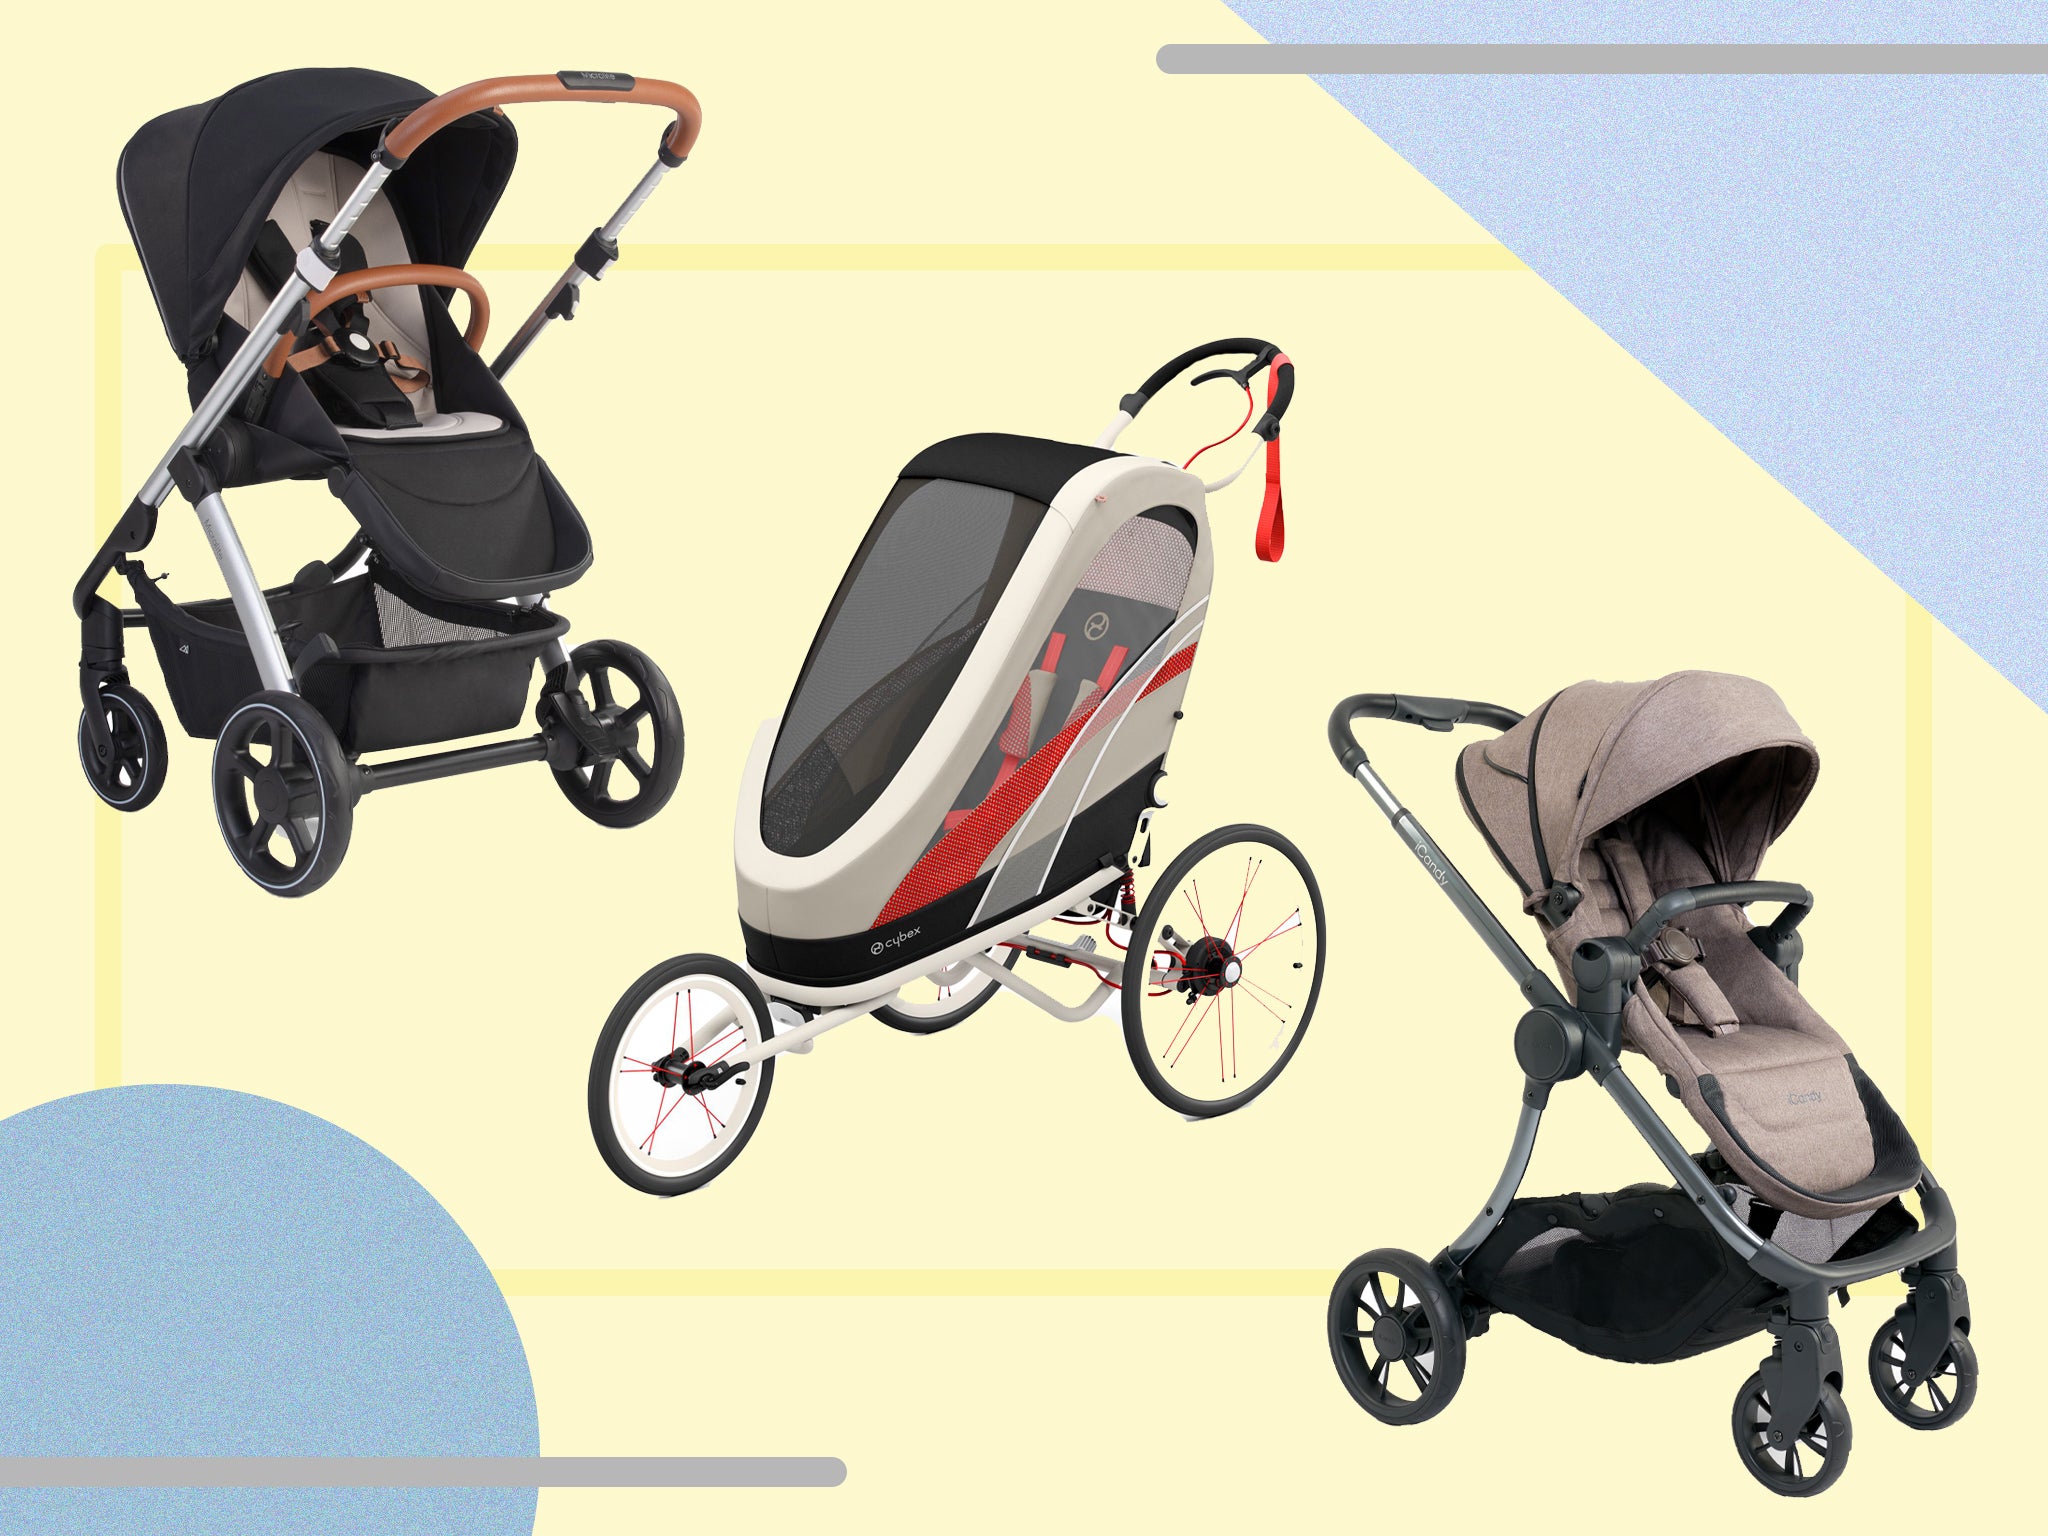 New Girl's Single Baby Stroller Infant Carriage Jogger Strollers Travel Walk 